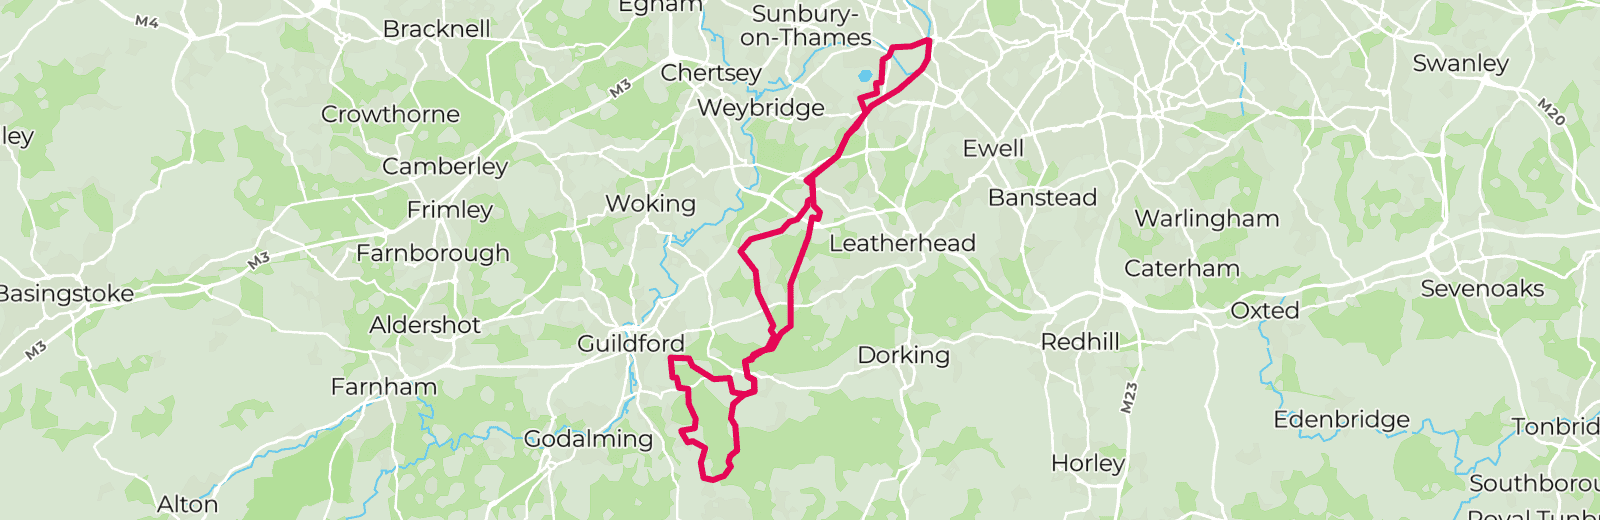 Map of Shere Delight route